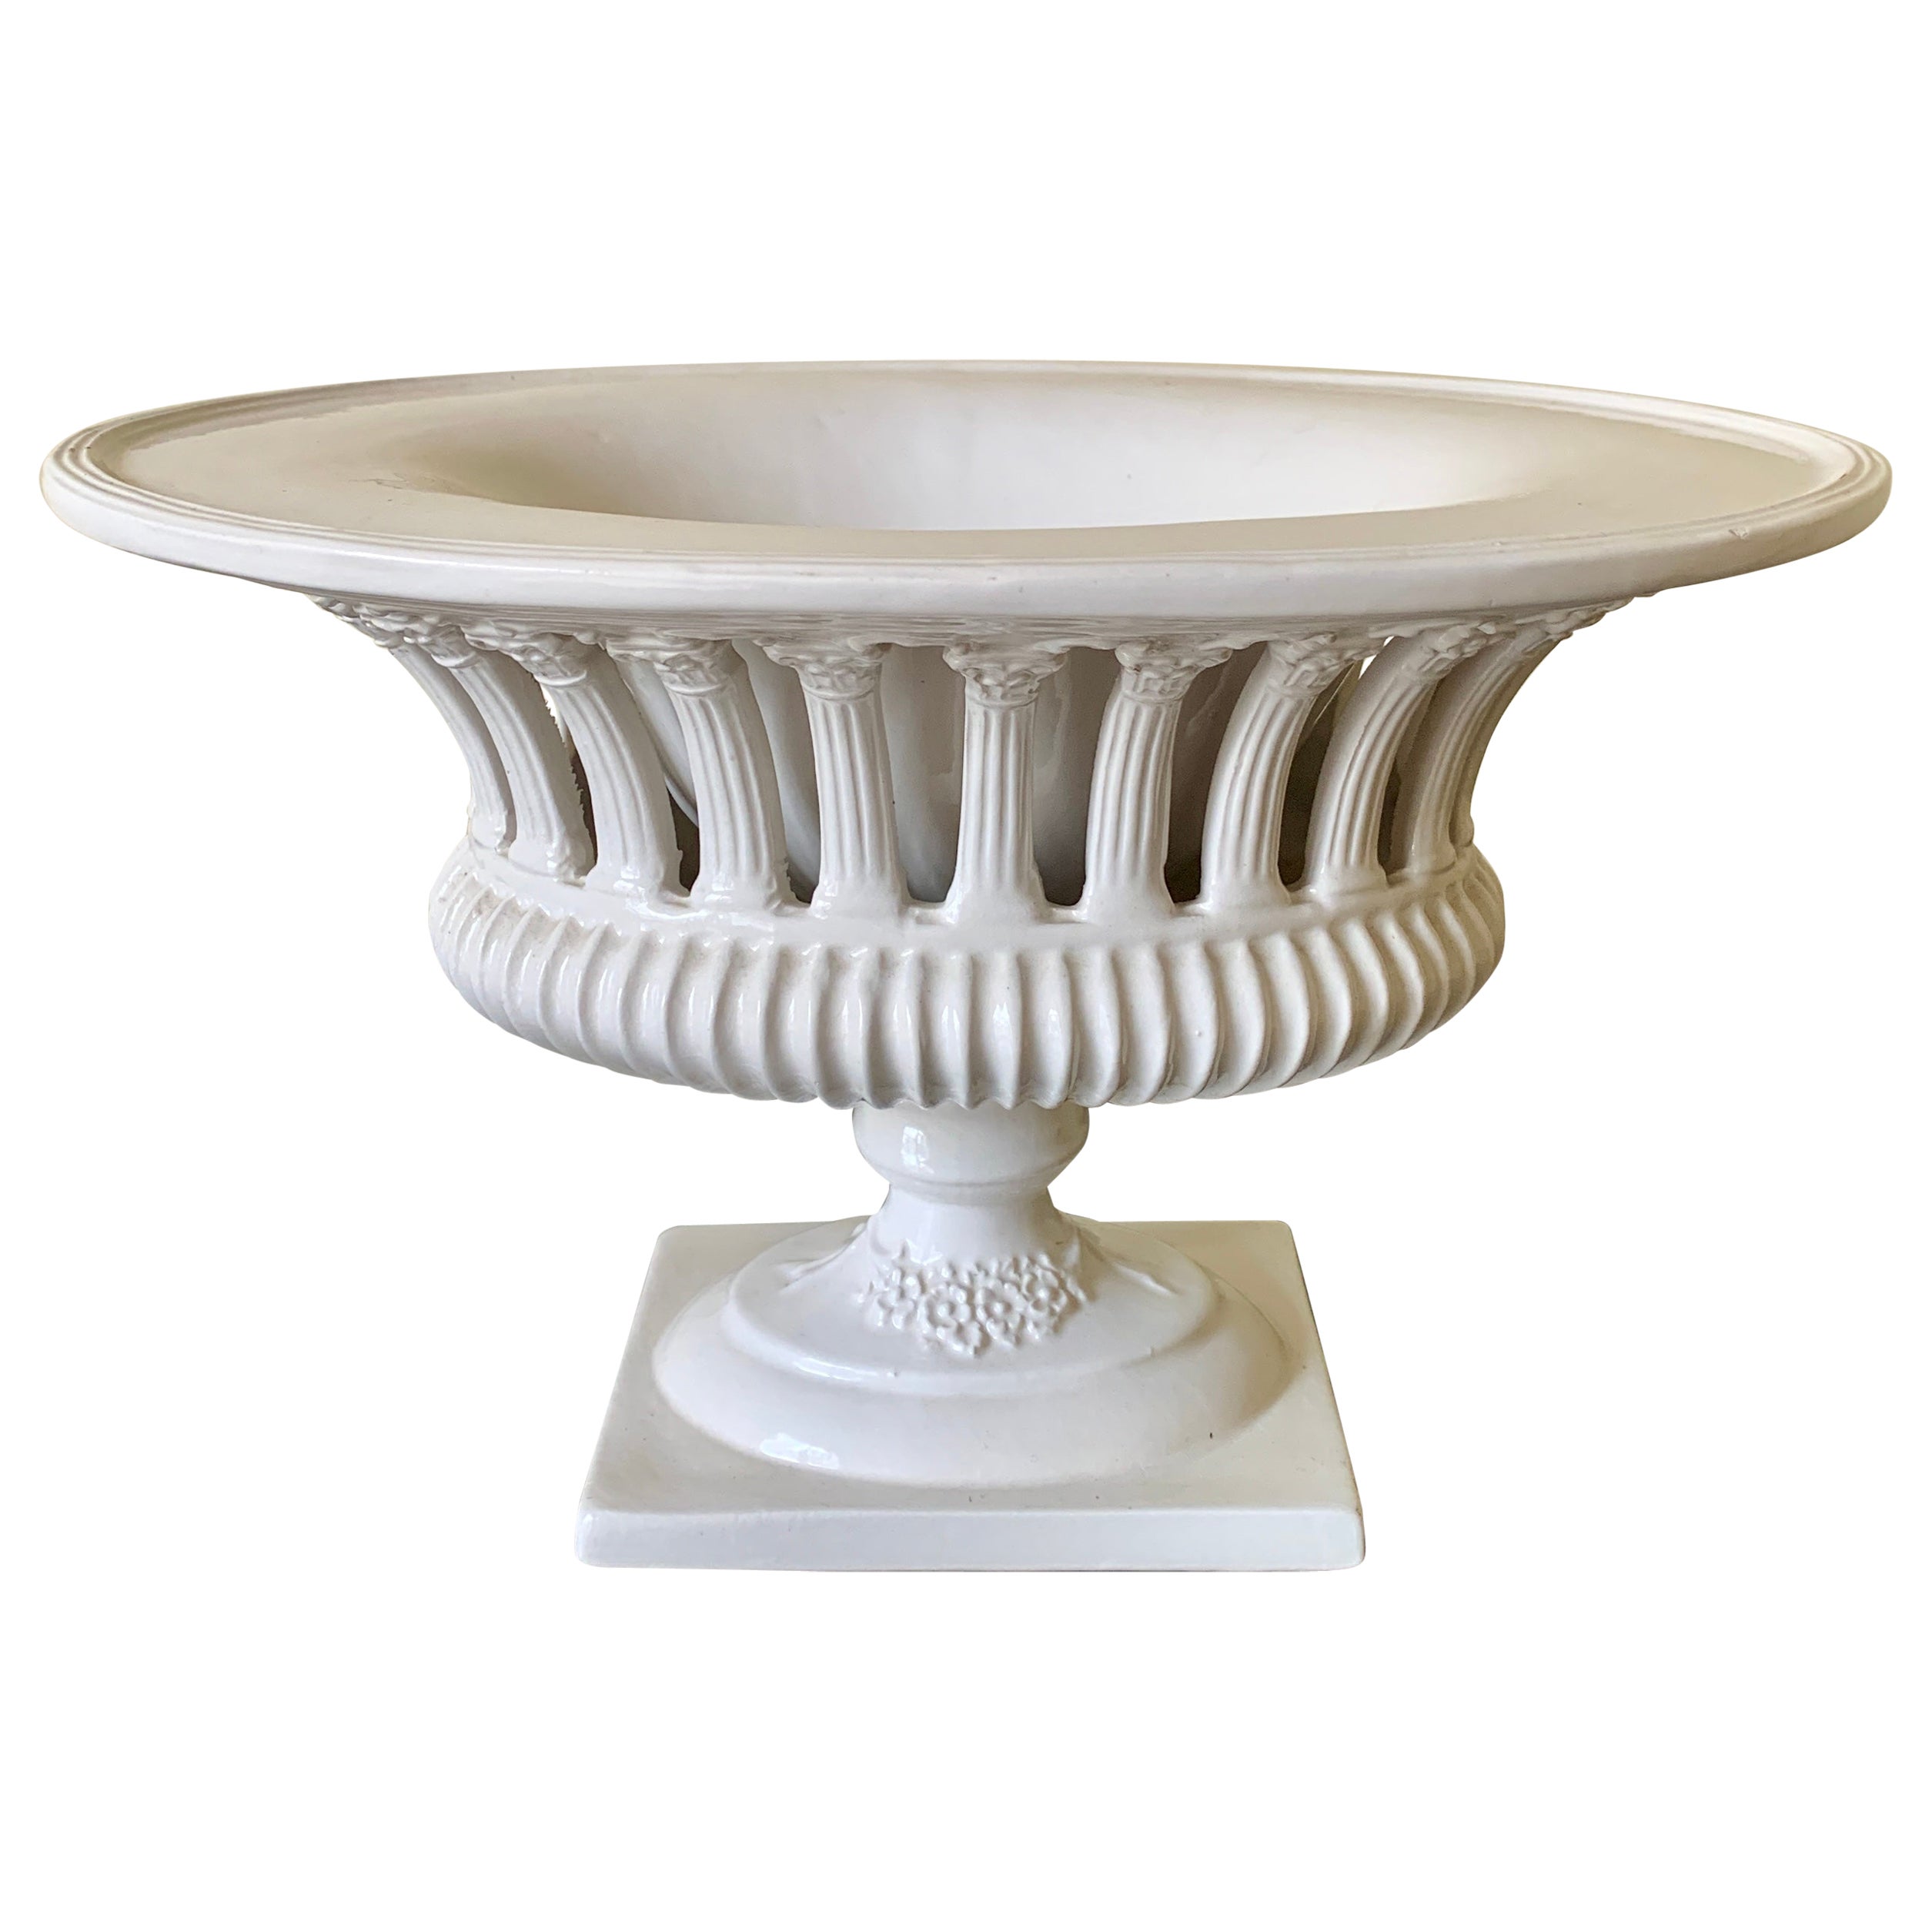 Neoclassical Italian Regency Reticulated White Porcelain Basket Compote